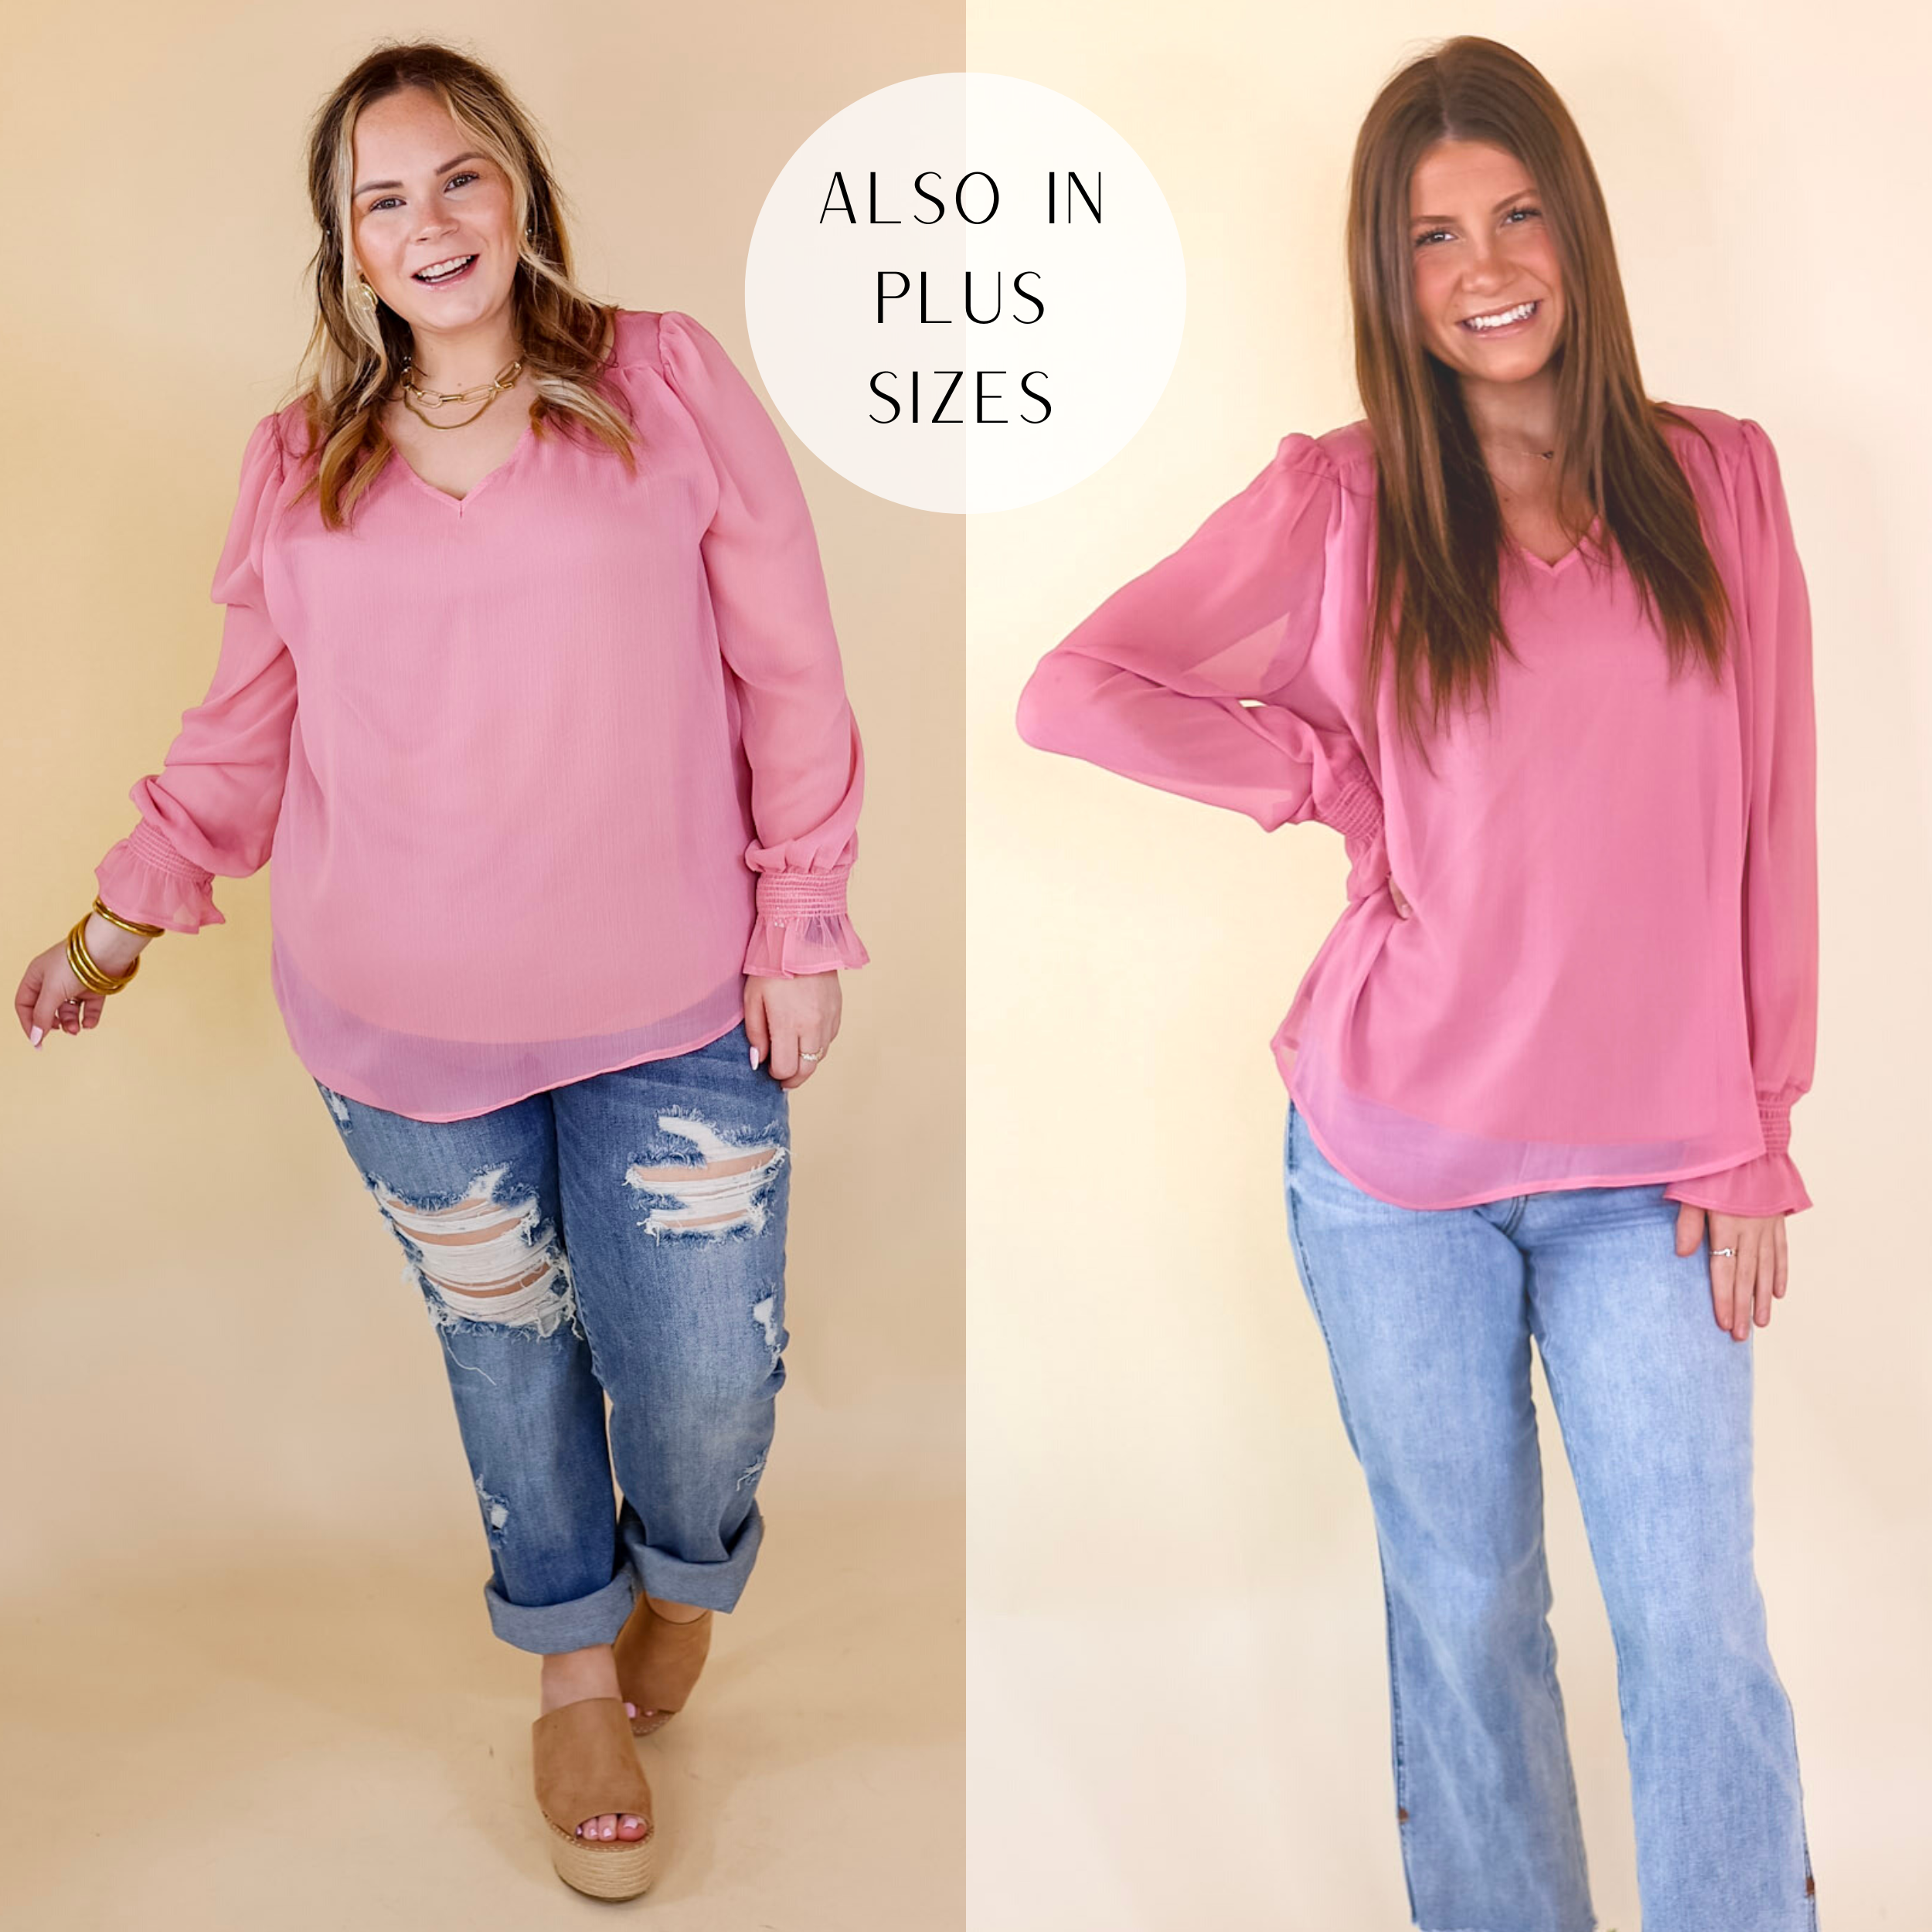 Models are wearing a mauve pink blouse with long sleeves and a v neckline. Size small model has it paired with light wash jeans and gold jewelry. Size large model has it paired with distressed jeans, gold jewelry, and tan wedges.